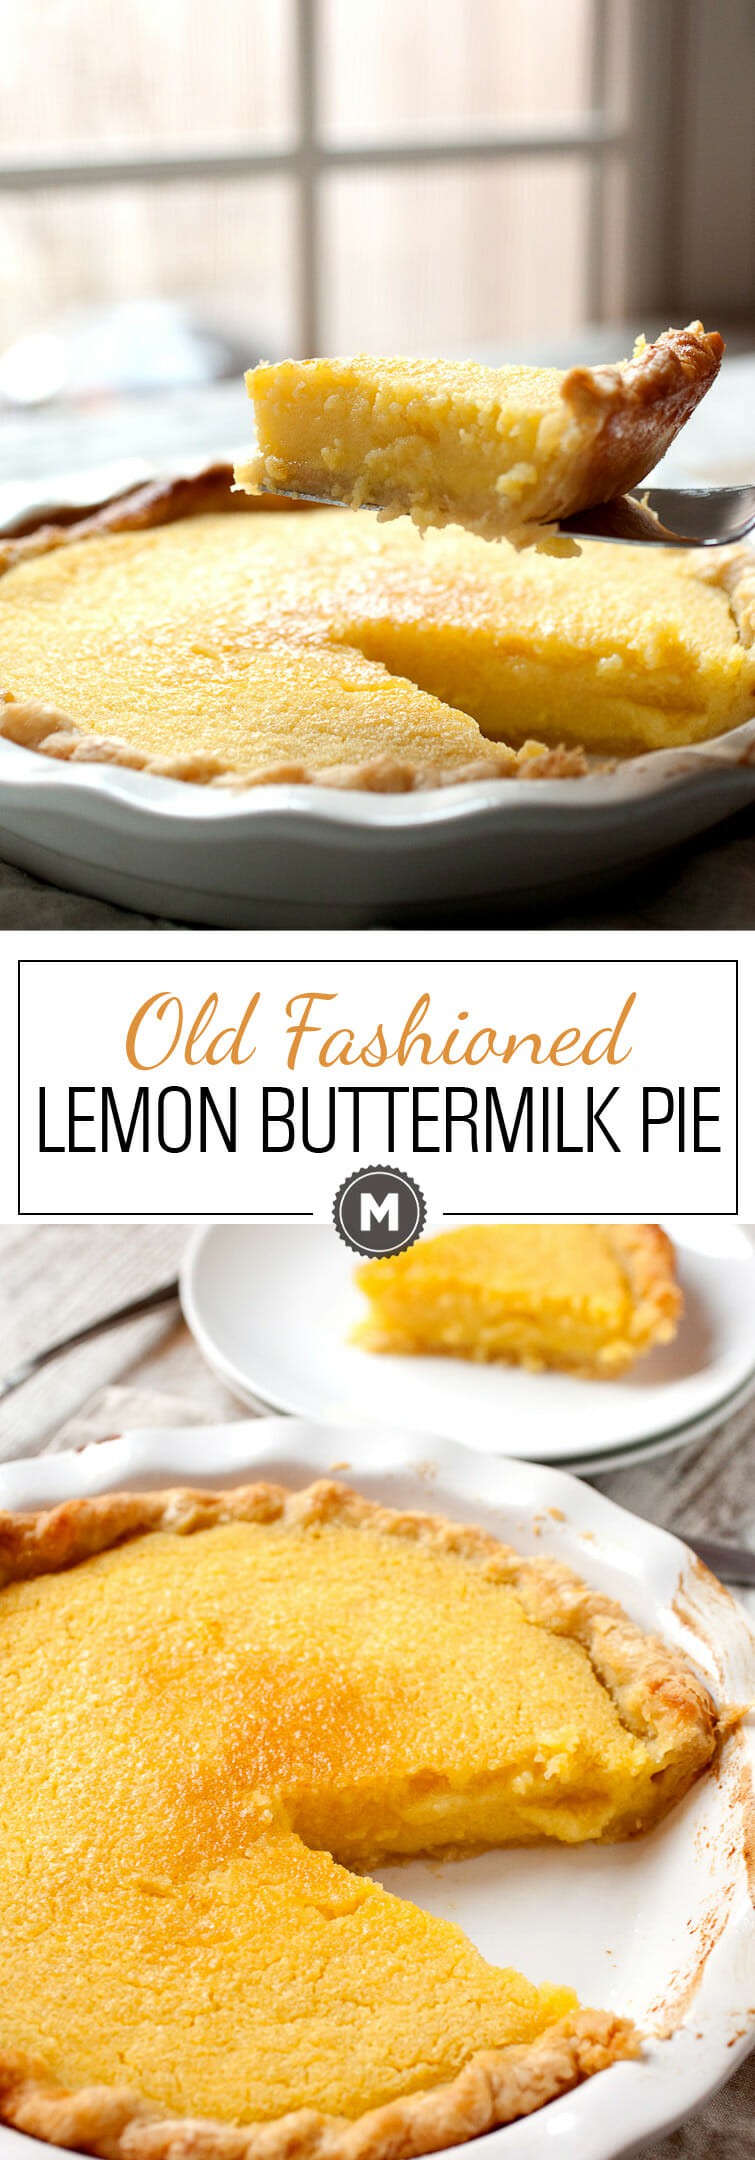 Old Fashioned Lemon Buttermilk Pie: This custard pie is such an unassuming pie. That's good news because it means people won't go for it first. But, once someone tries it, it'll go quick. Easy to make with just a few ingredients! | macheesmo.com